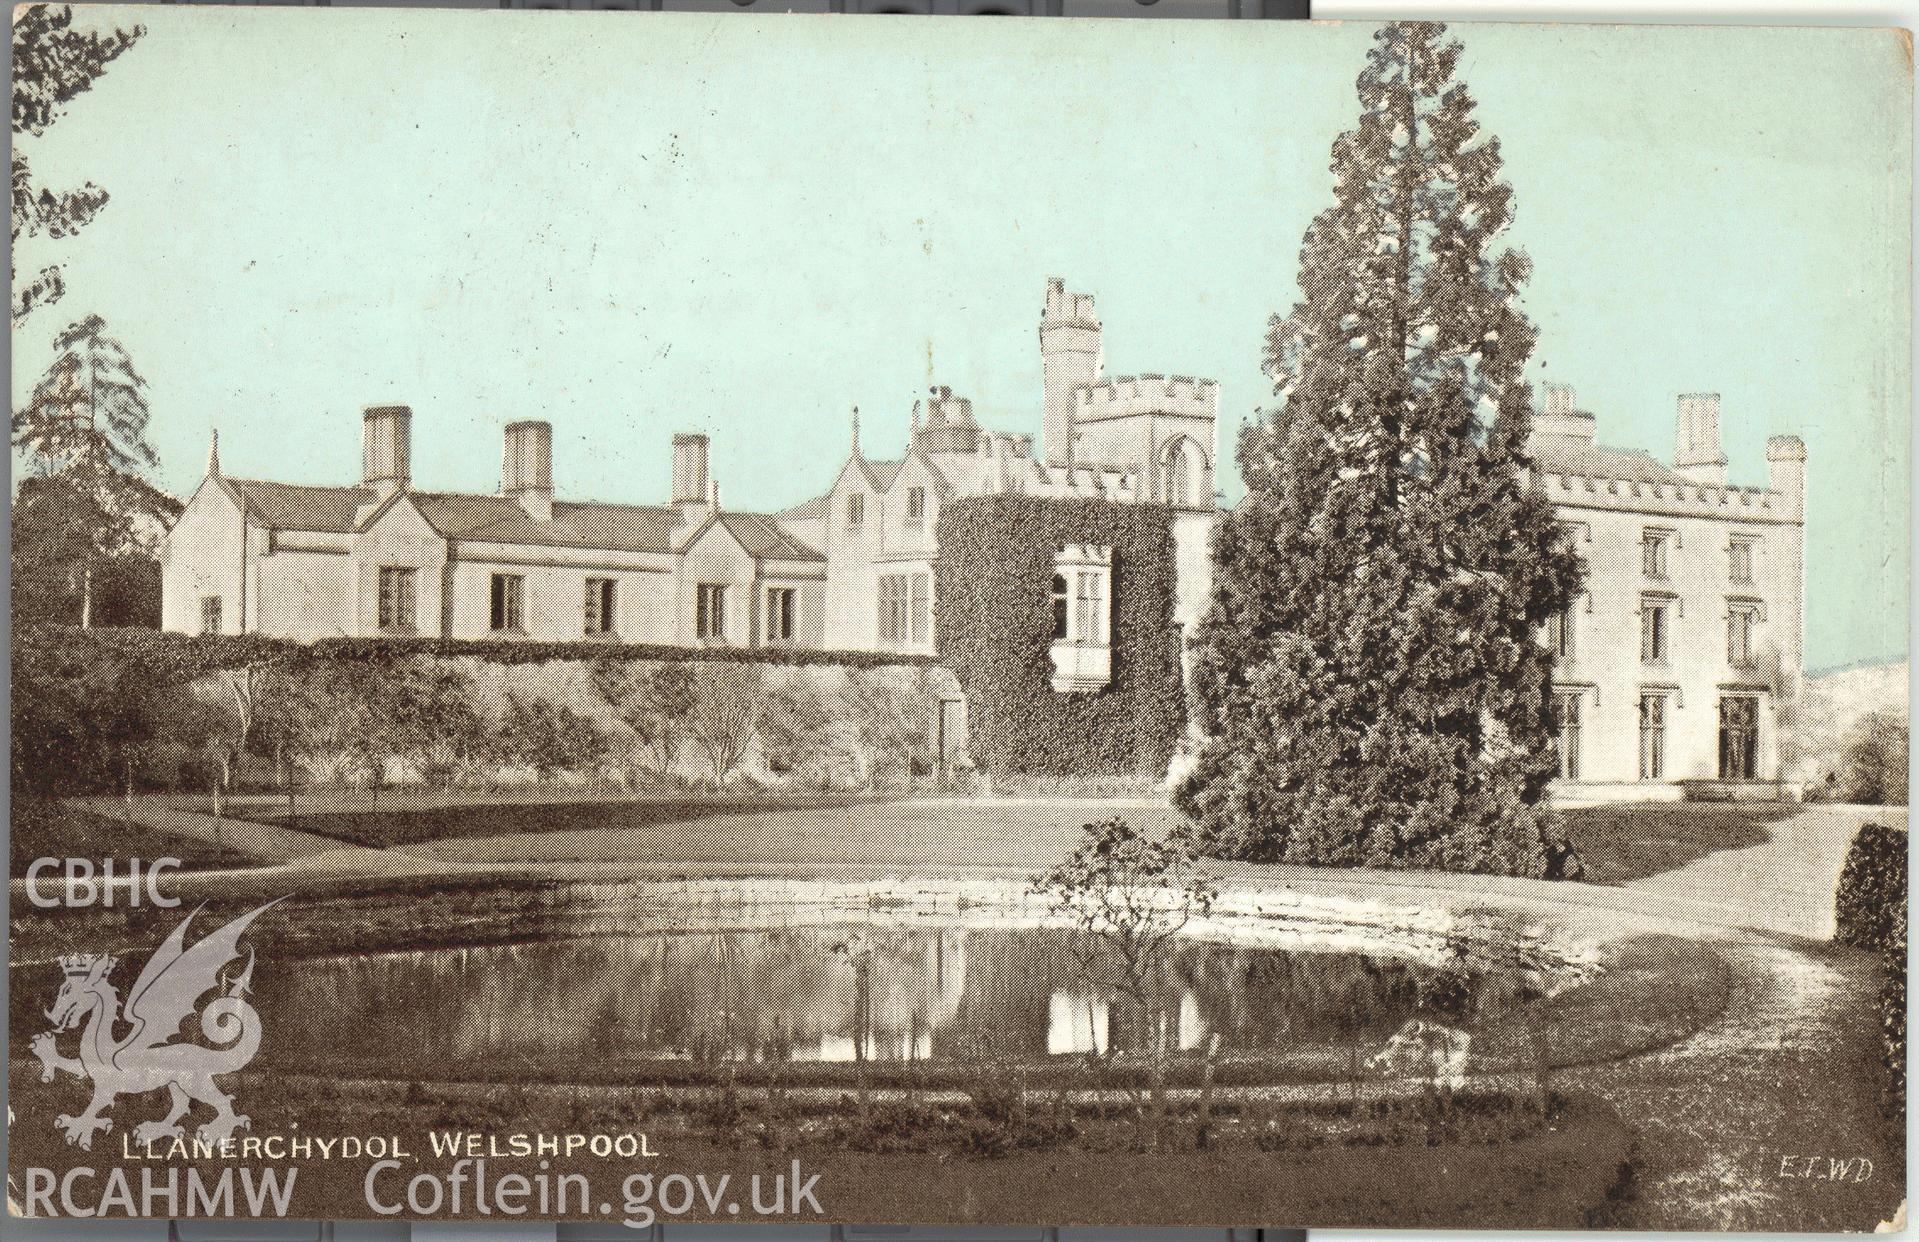 Digitised postcard image of Llanerchydol Hall, Welshpool, with pond, Dainty series. Produced by Parks and Gardens Data Services, from an original item in the Peter Davis Collection at Parks and Gardens UK. We hold only web-resolution images of this collection, suitable for viewing on screen and for research purposes only. We do not hold the original images, or publication quality scans.